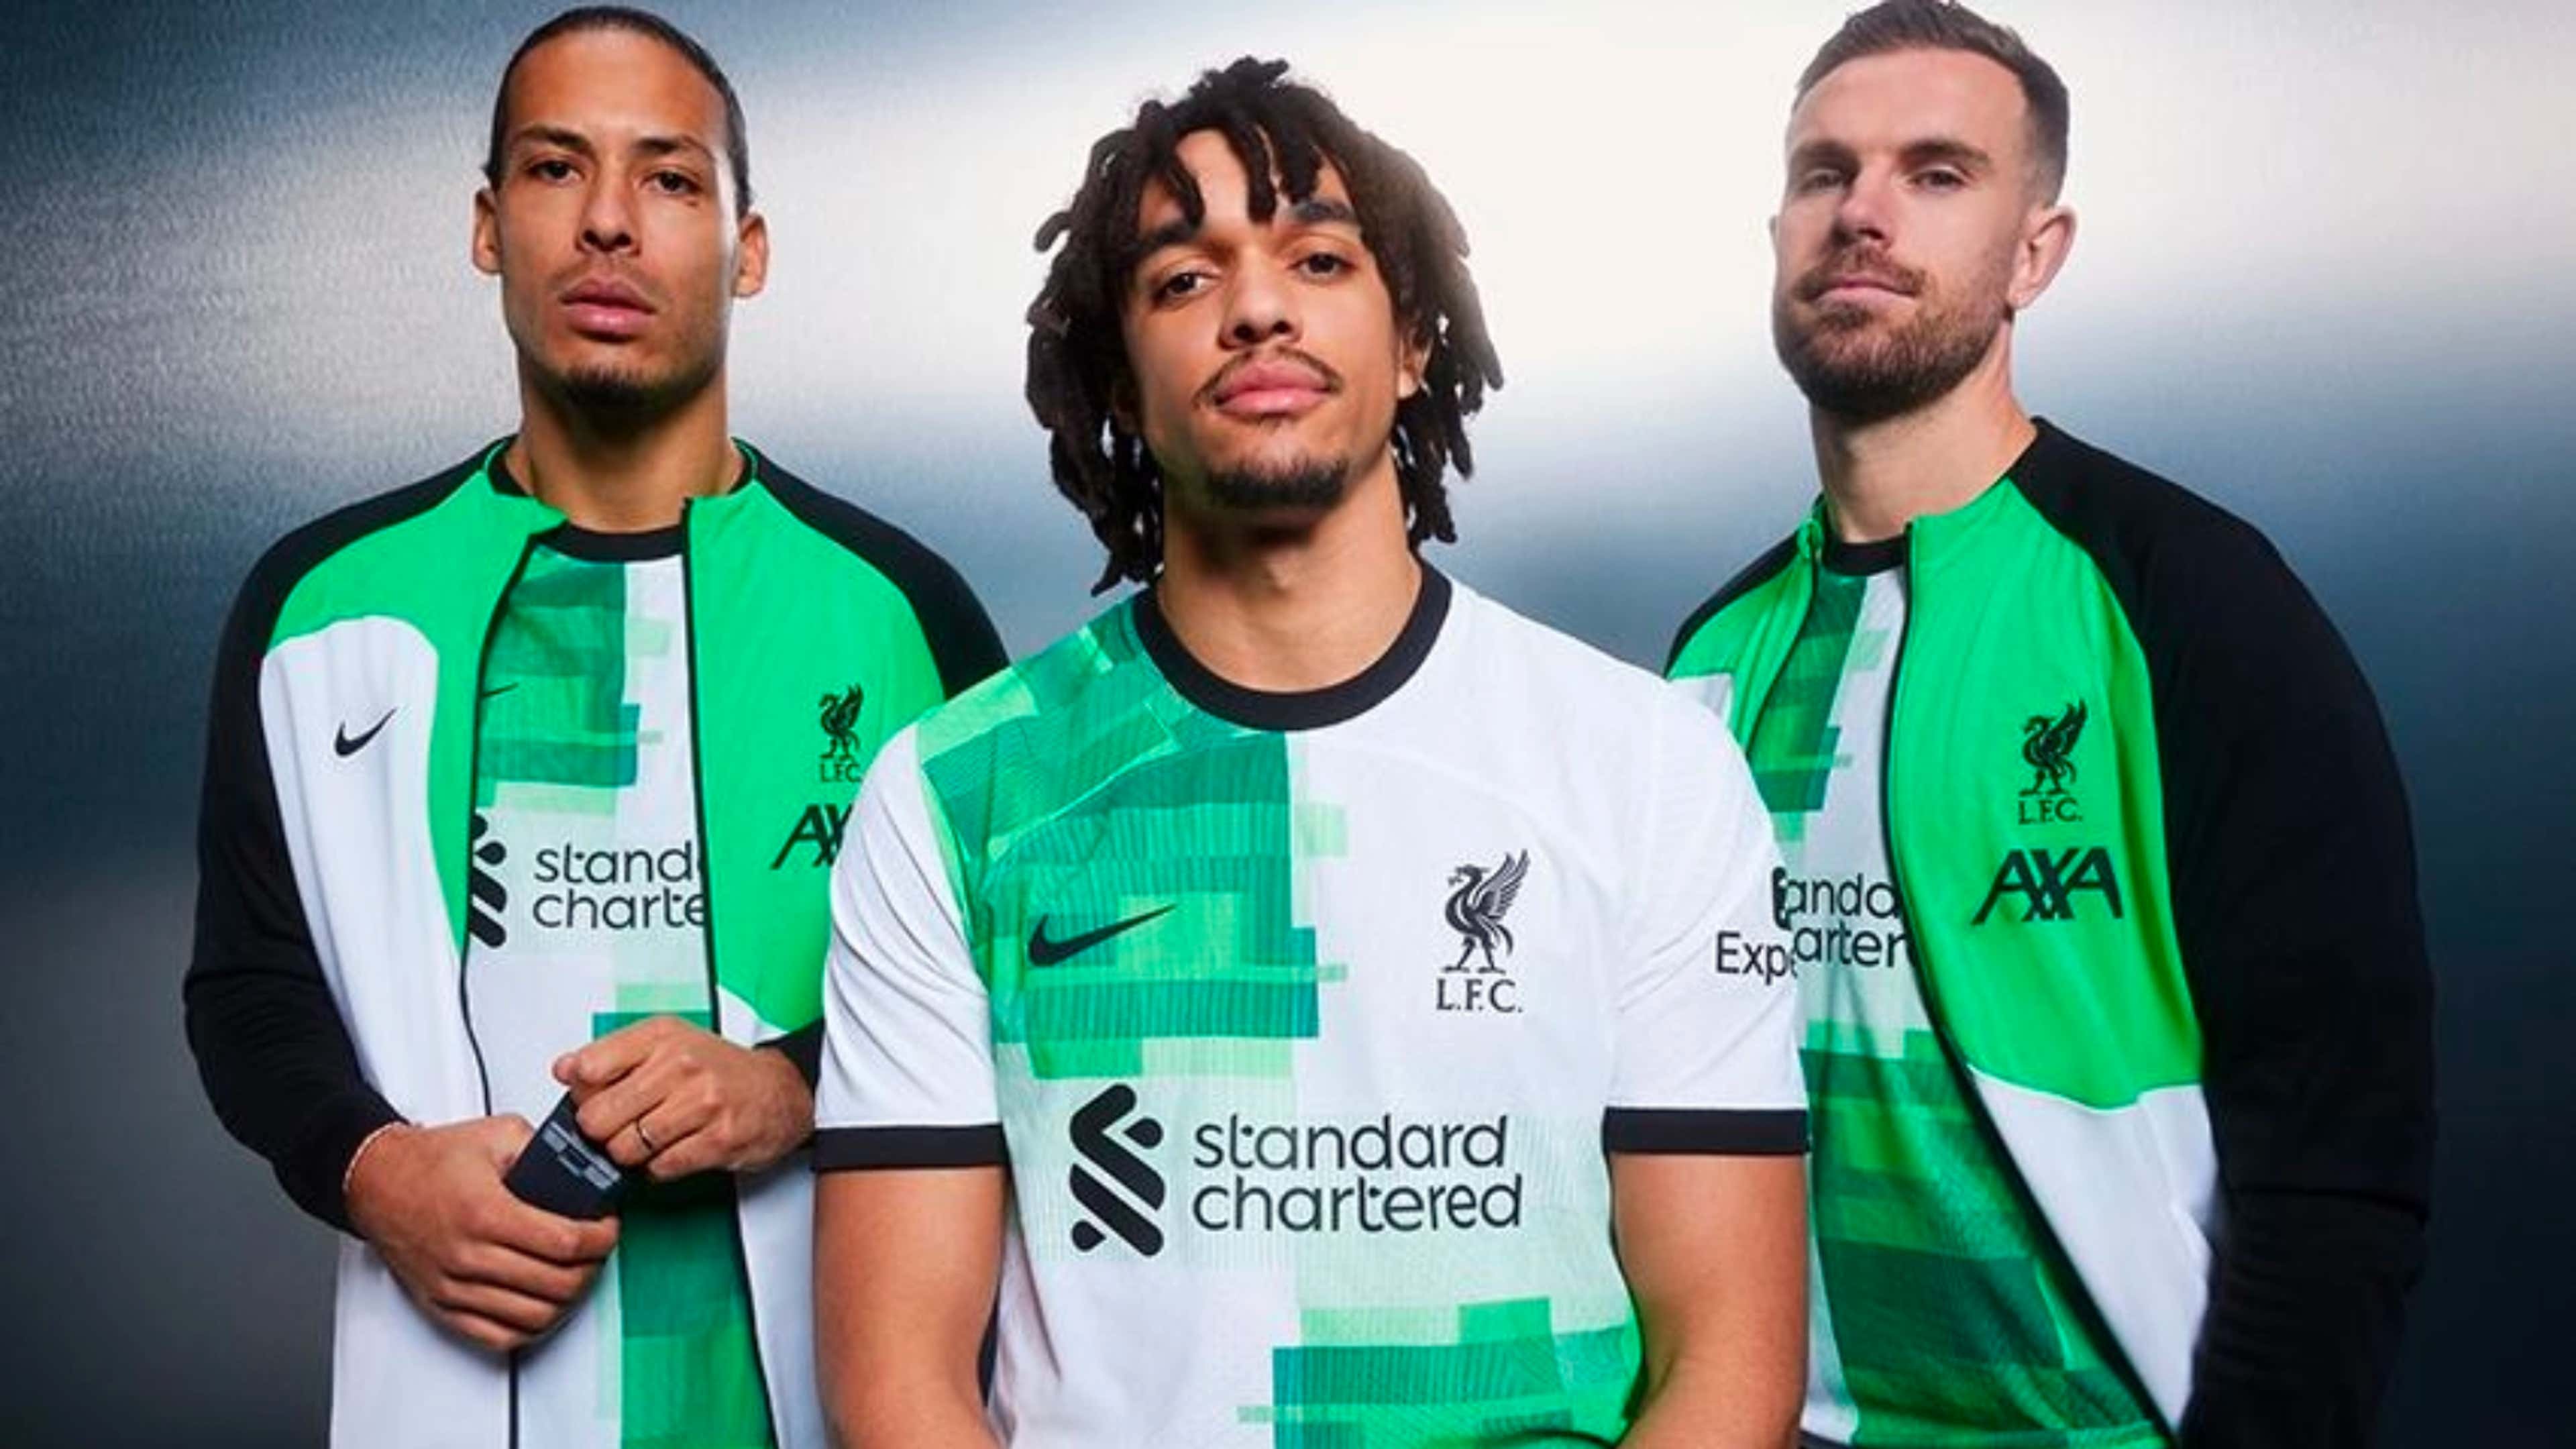 Liverpool release new away kit for 2018/19 season - and it's a